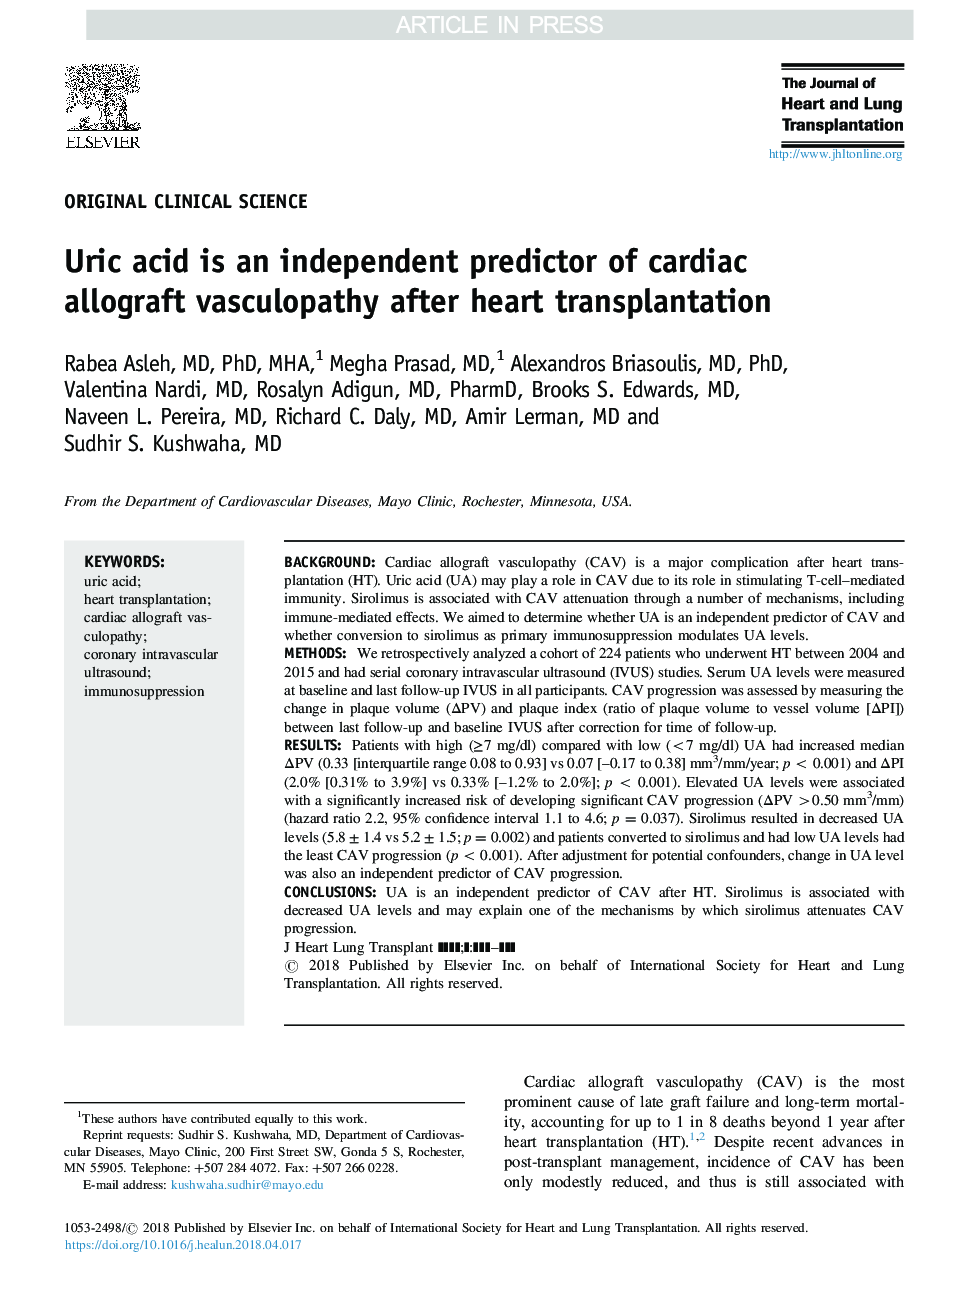 Uric acid is an independent predictor of cardiac allograft vasculopathy after heart transplantation